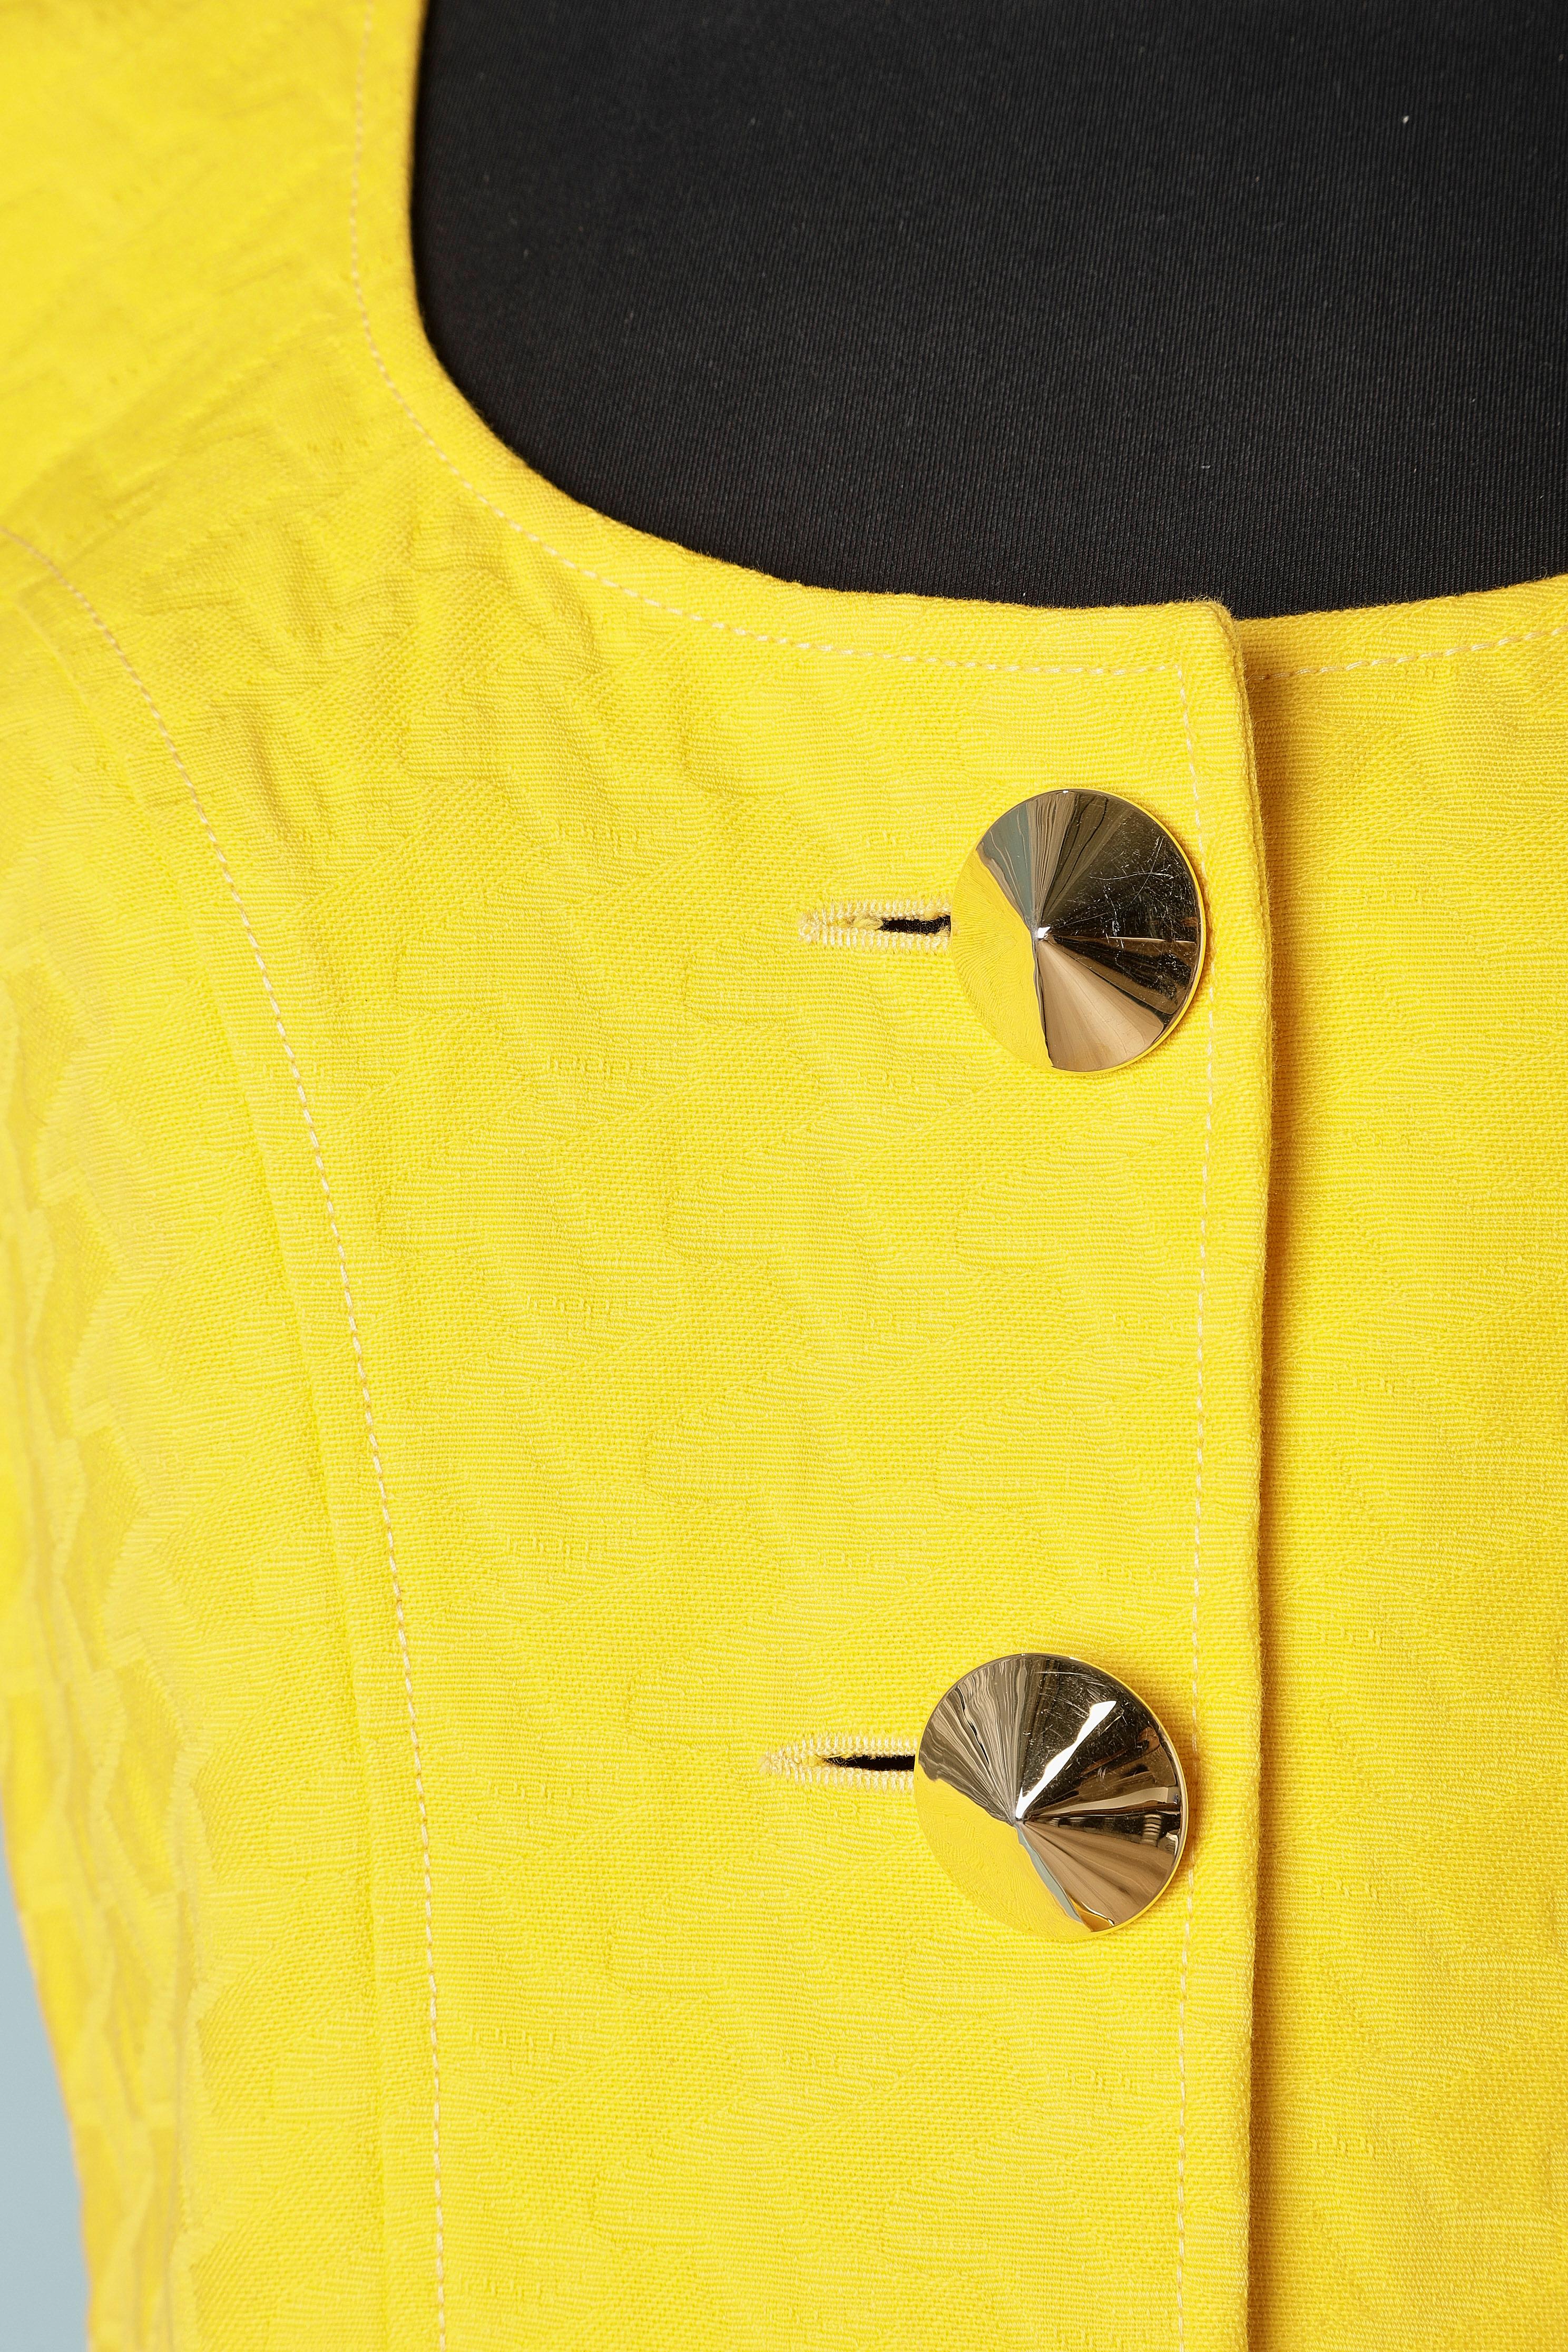 Yellow cotton jacquard skirt-suit with gold metal buttons. Polyester lining.
SIZE M 